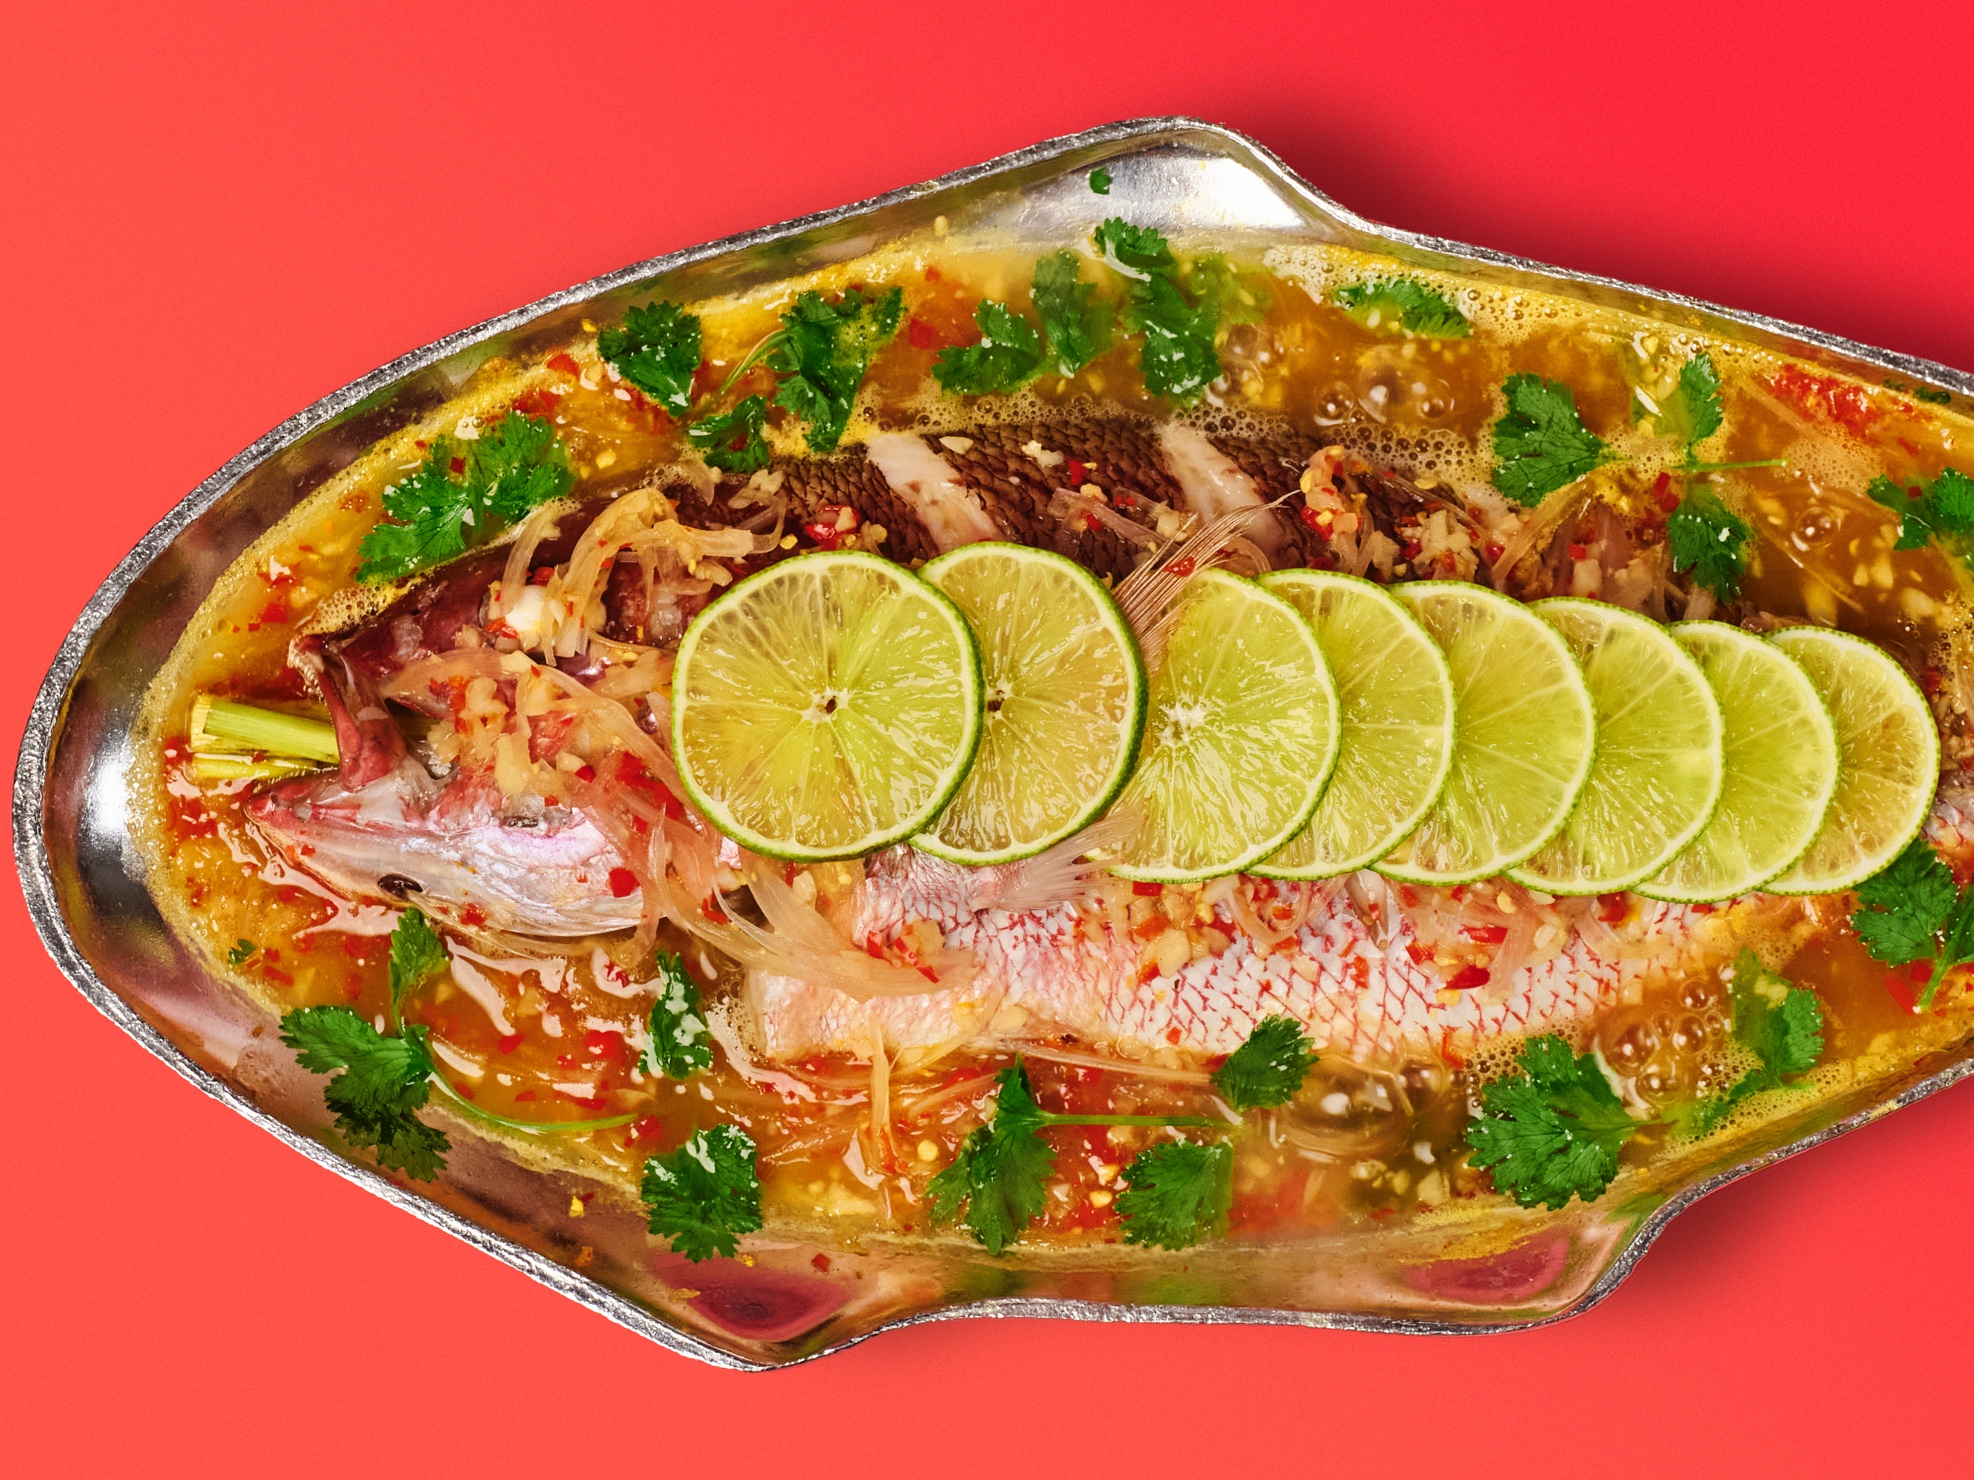 Thai-Style Steamed Fish With Garlic and Lime (Pla Gapong Neung Manao)